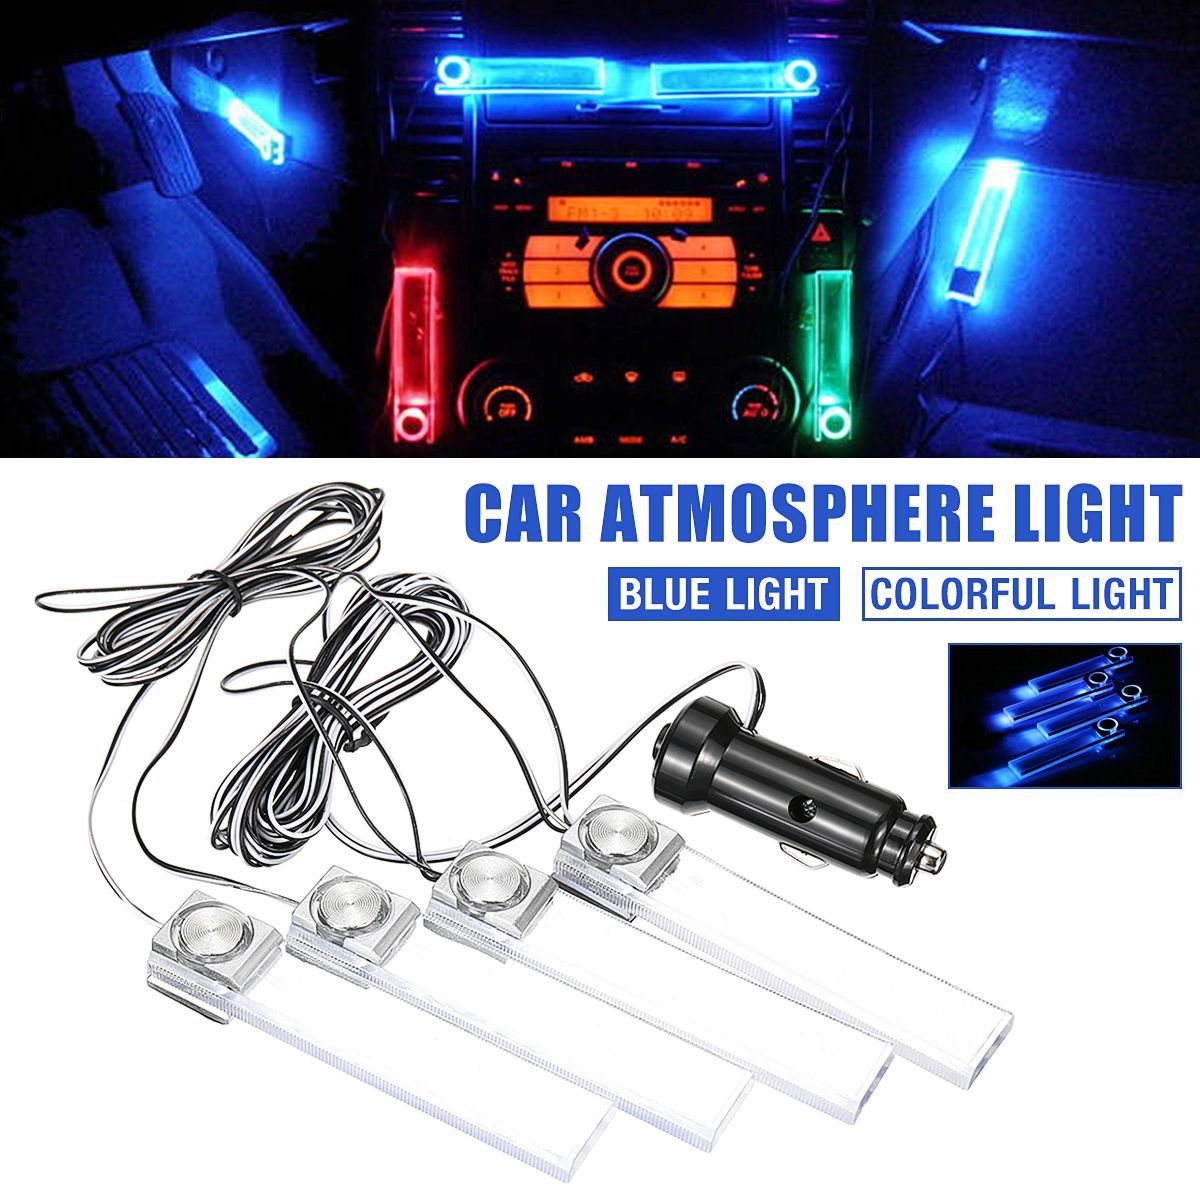 Car-LED-Atmosphere-Lamp-Interior-Decoration-Lamp-Indoor-Foot-Lamp-Cig-Lighter-ColorfulBlue-1681655